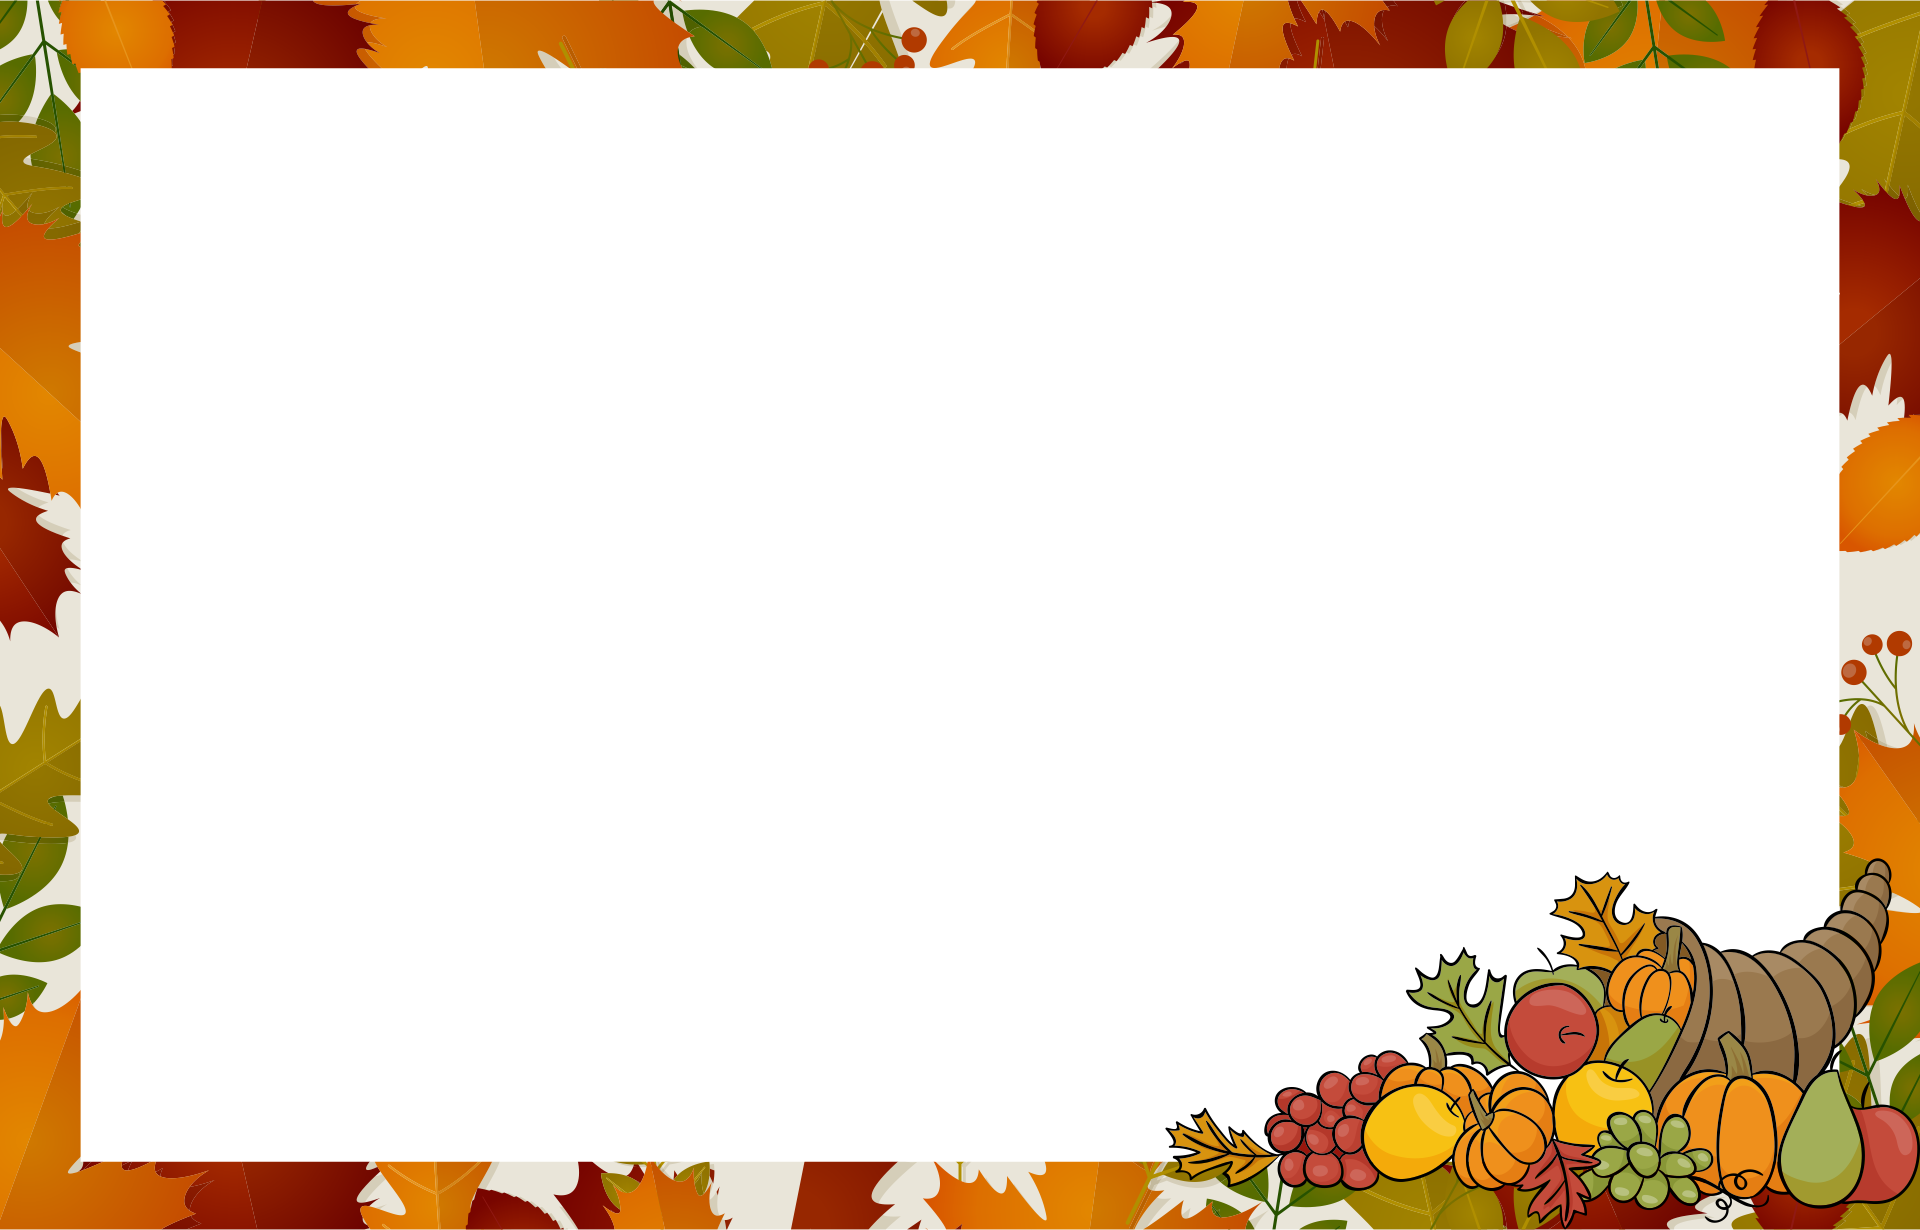 Thanksgiving PowerPoint Templates